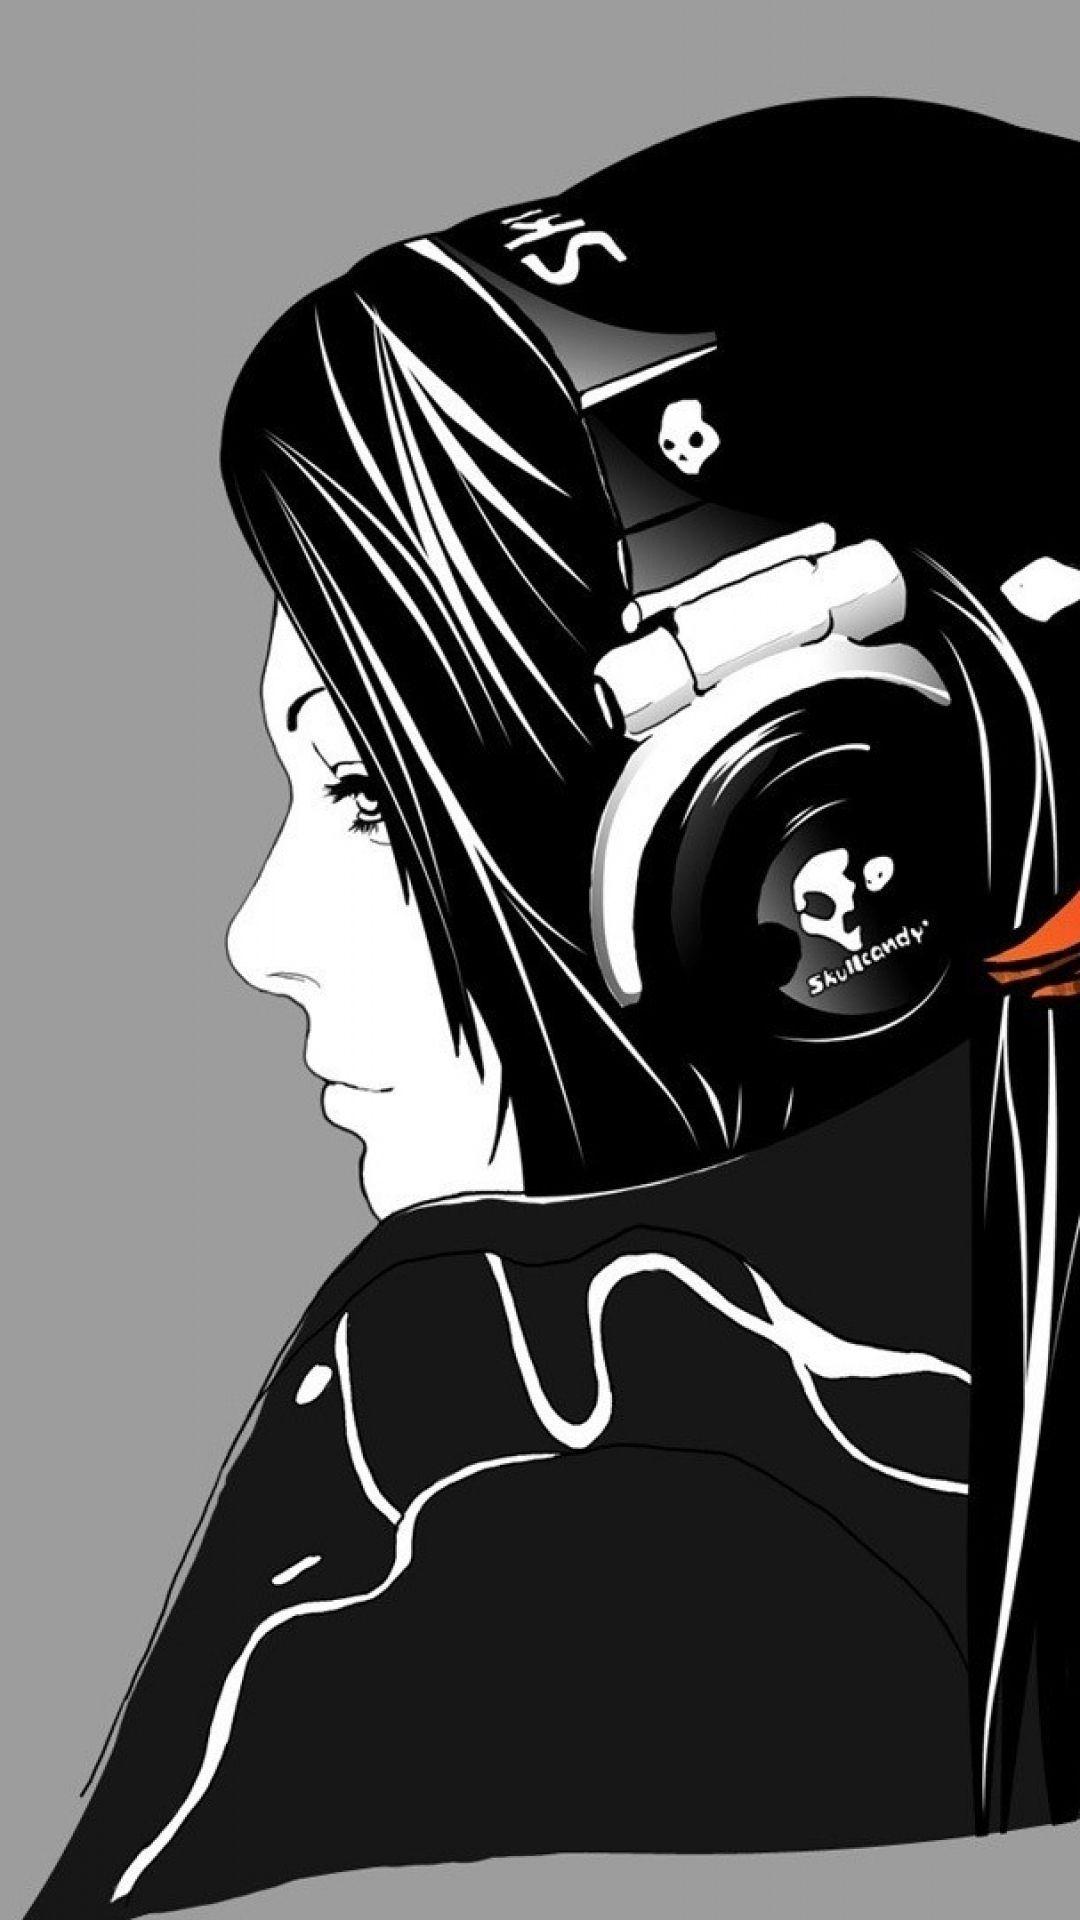 Music iPhone Wallpaper For Music Manias. Girl with headphones